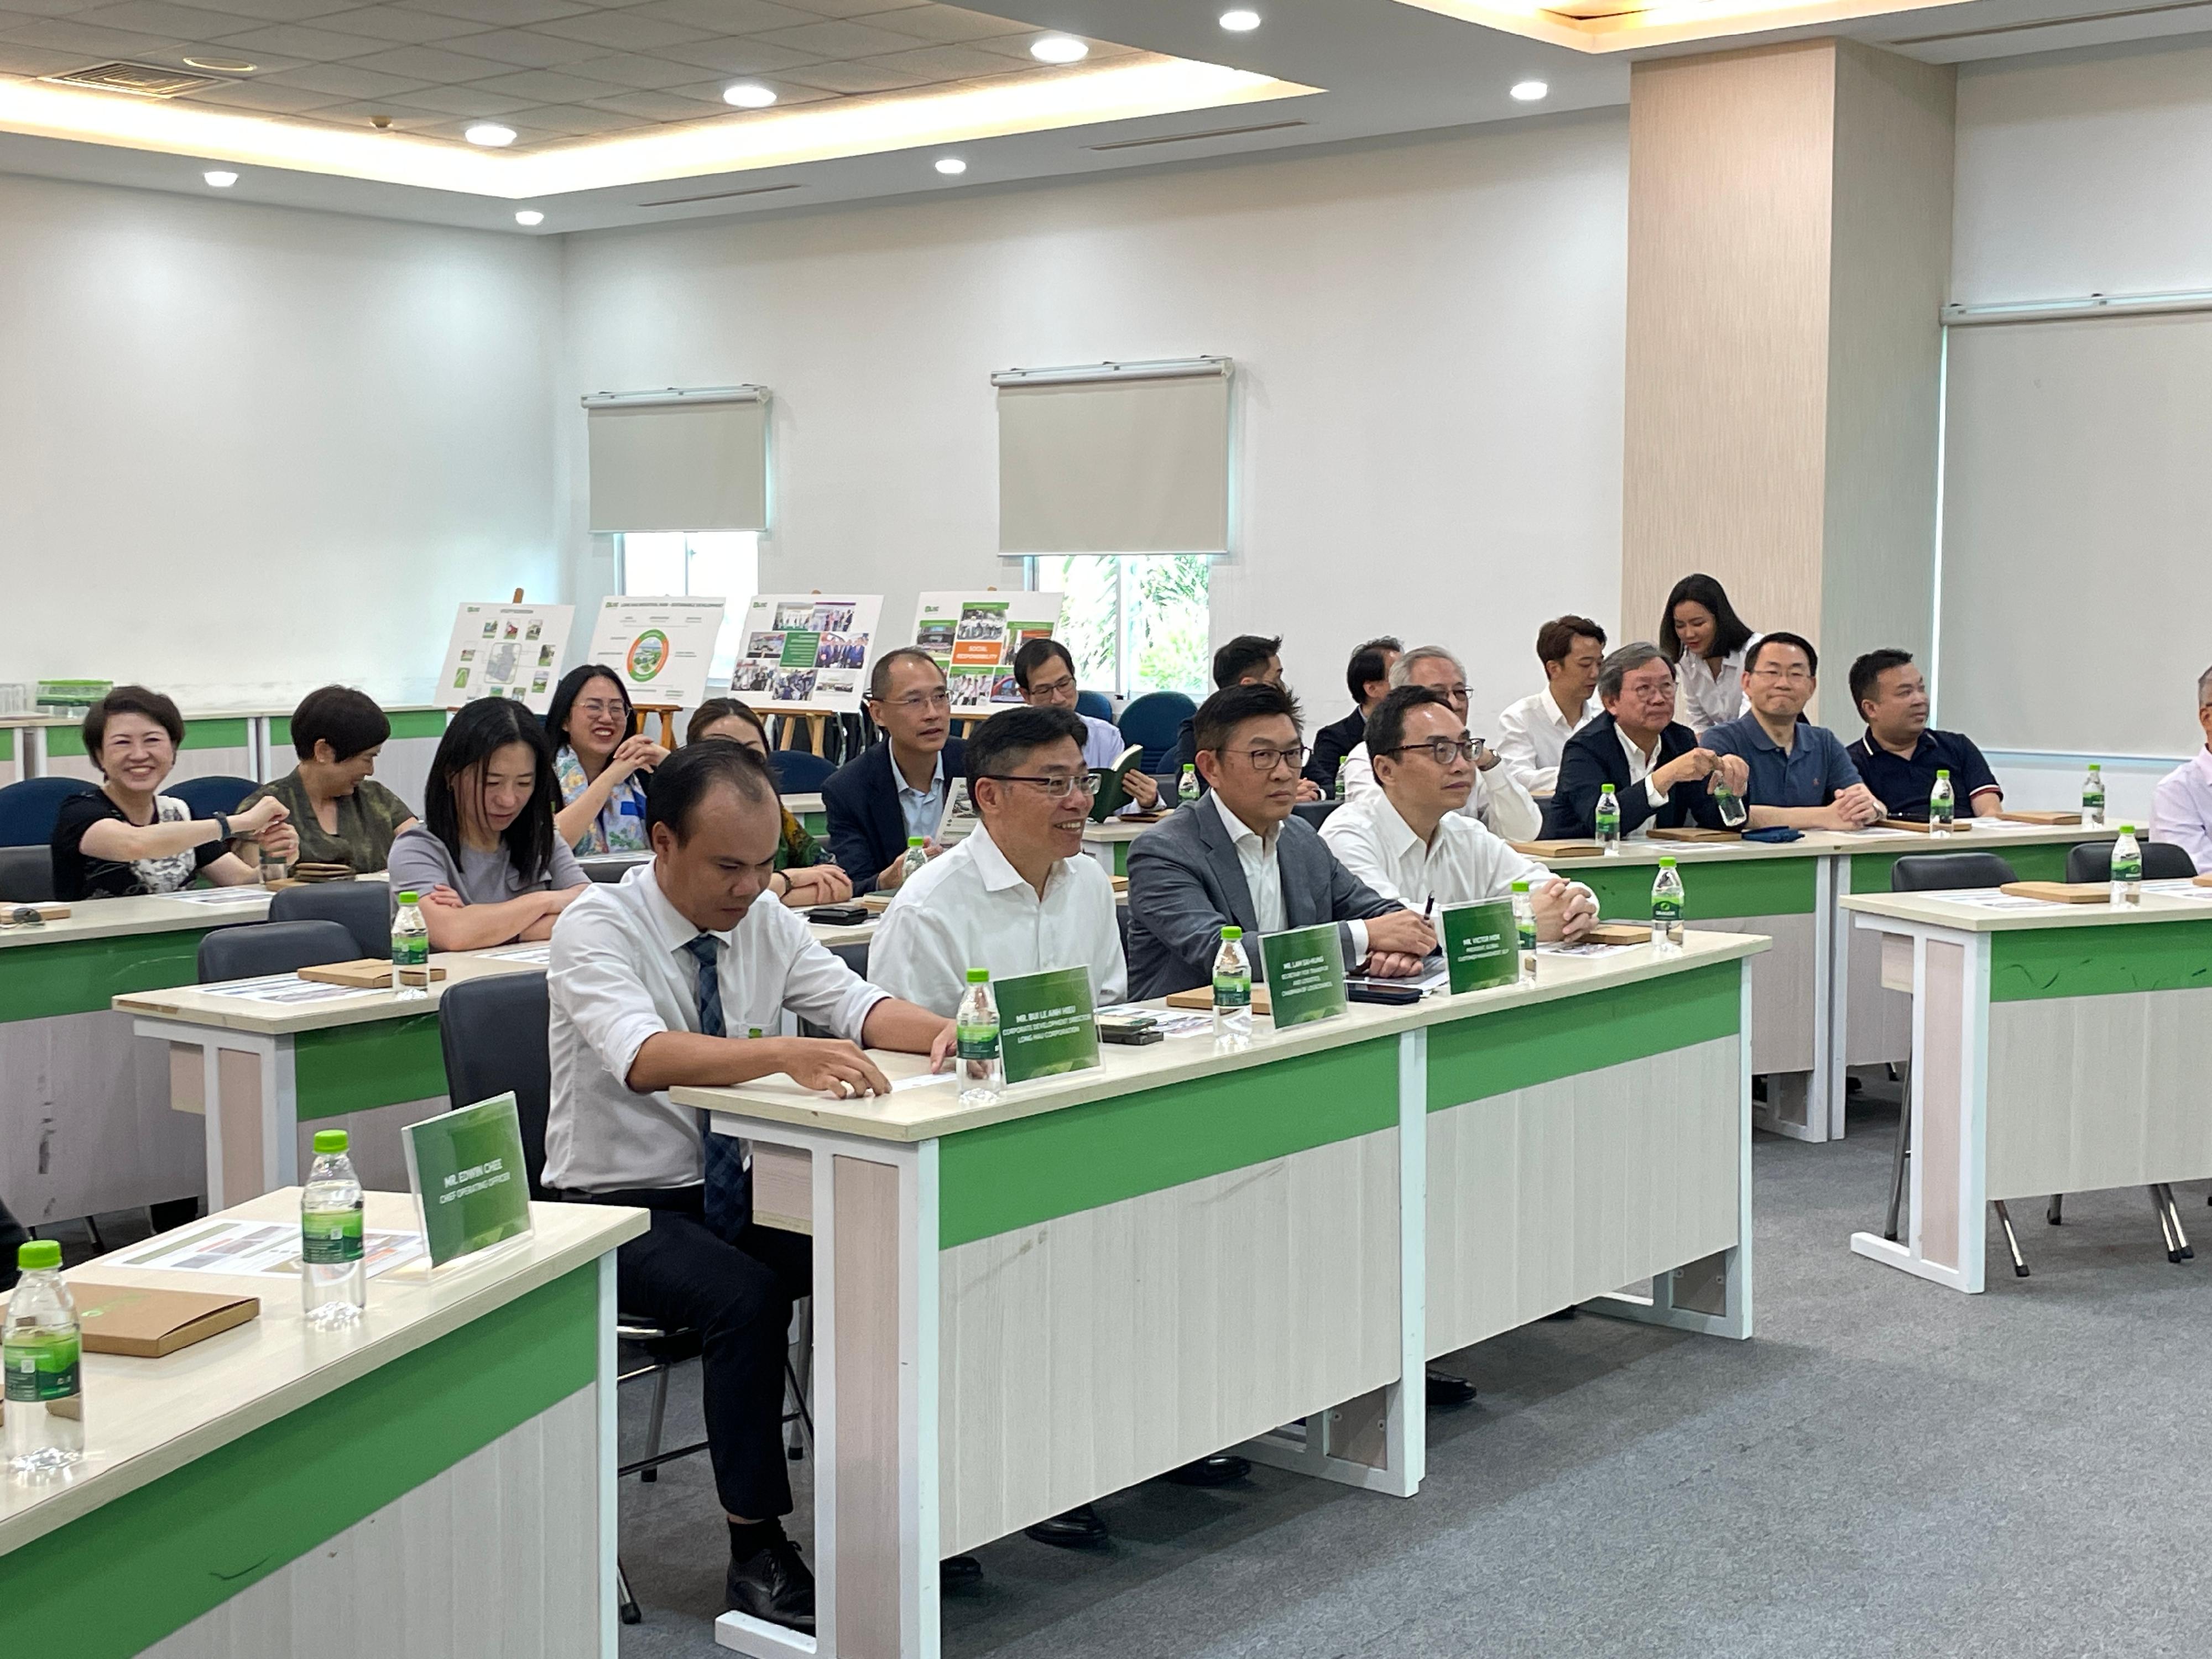 The Secretary for Transport and Logistics, Mr Lam Sai-hung (first row, second left), together with members of the Hong Kong Logistics Development Council delegation, visited a large-scale smart logistics park in Ho Chi Minh City to learn about its operation today (October 12).
